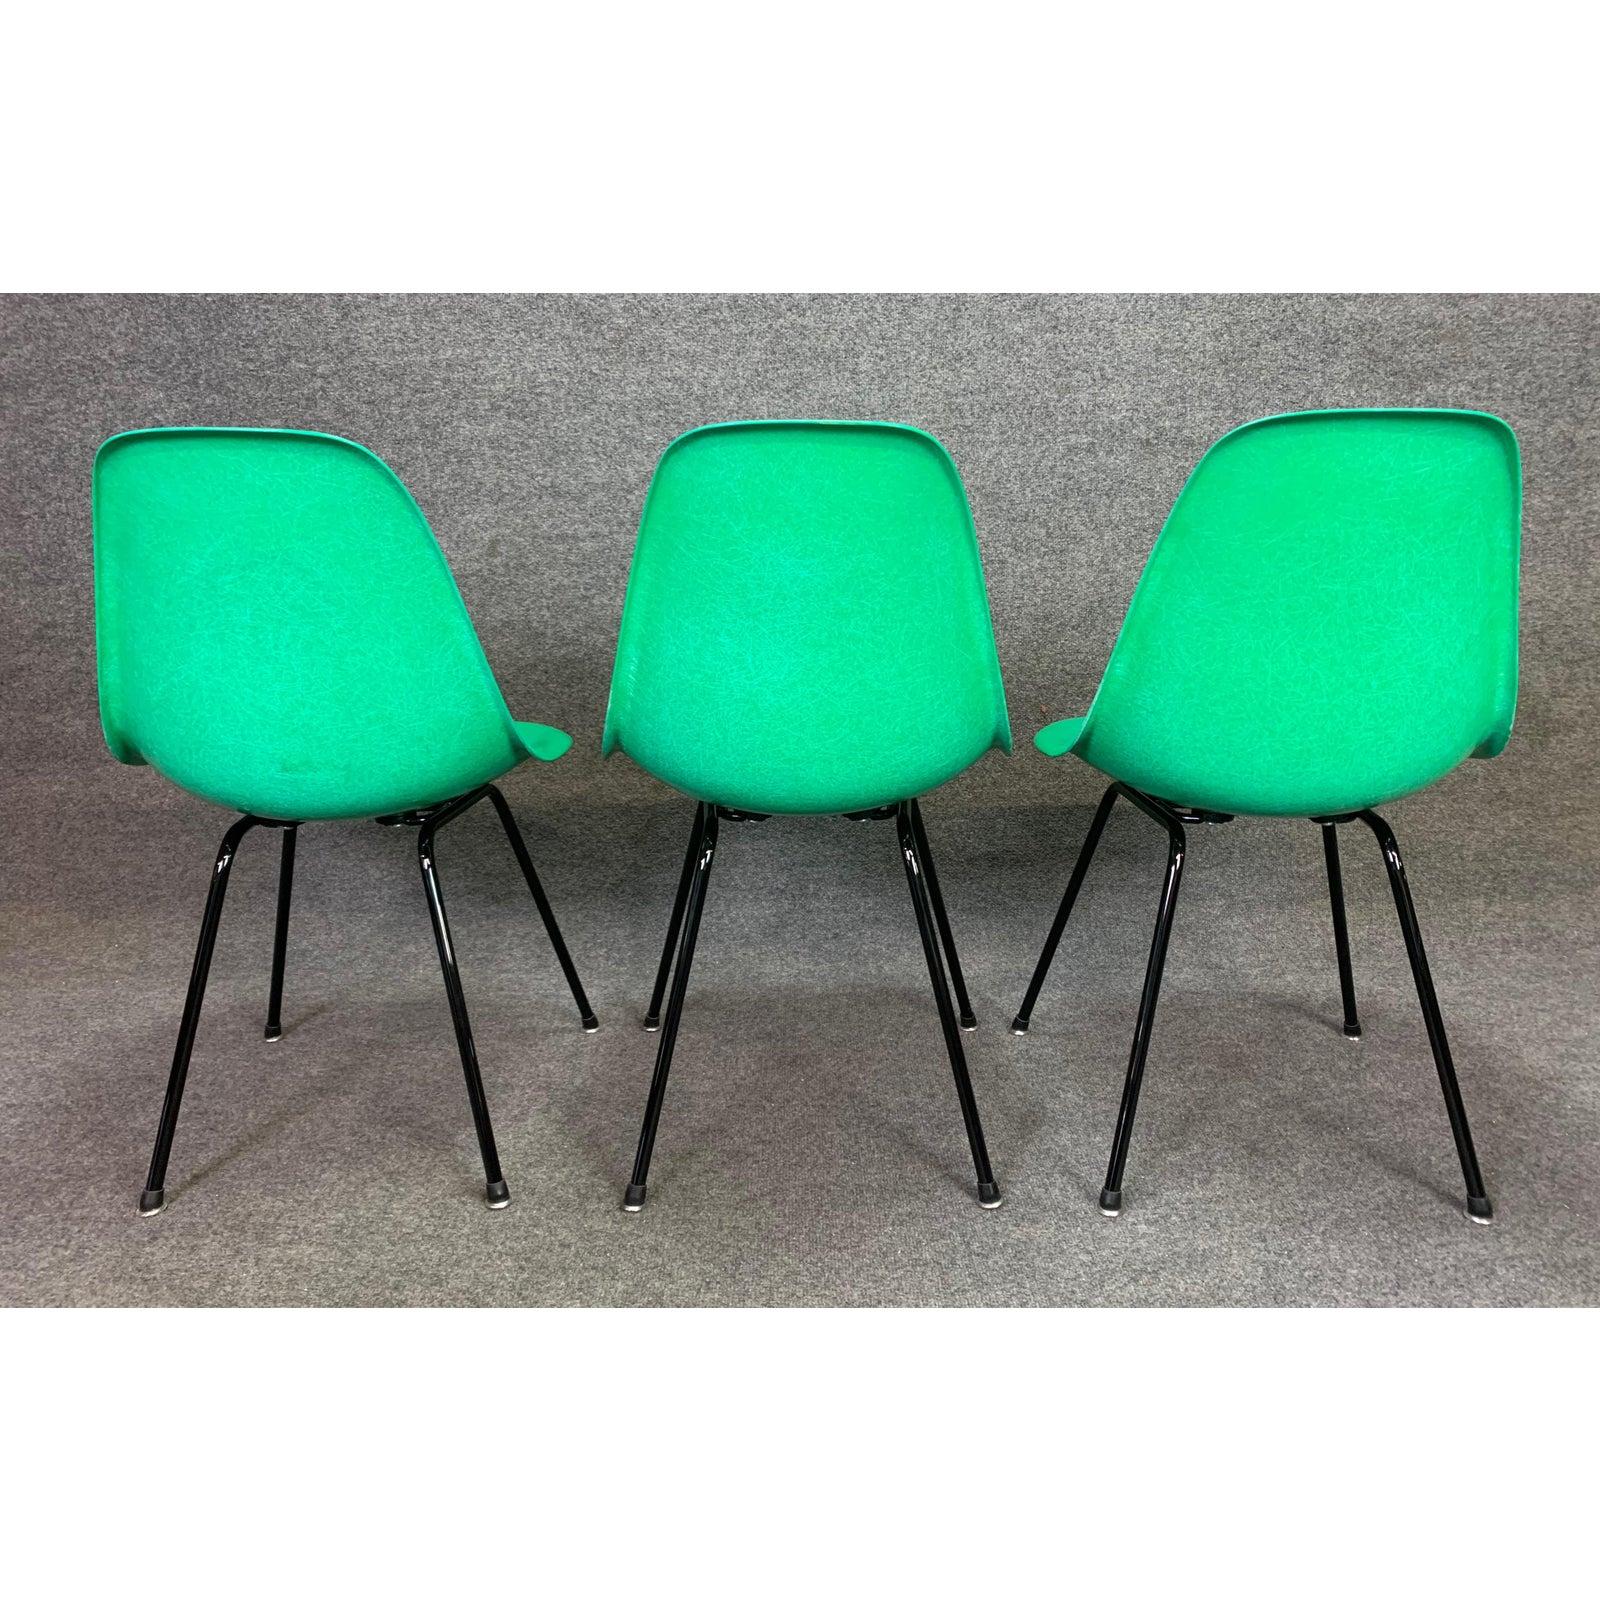 Mid-20th Century Set of 6 Midcentury DSX Fiberglass Chairs by Charles Eames for Herman Miller